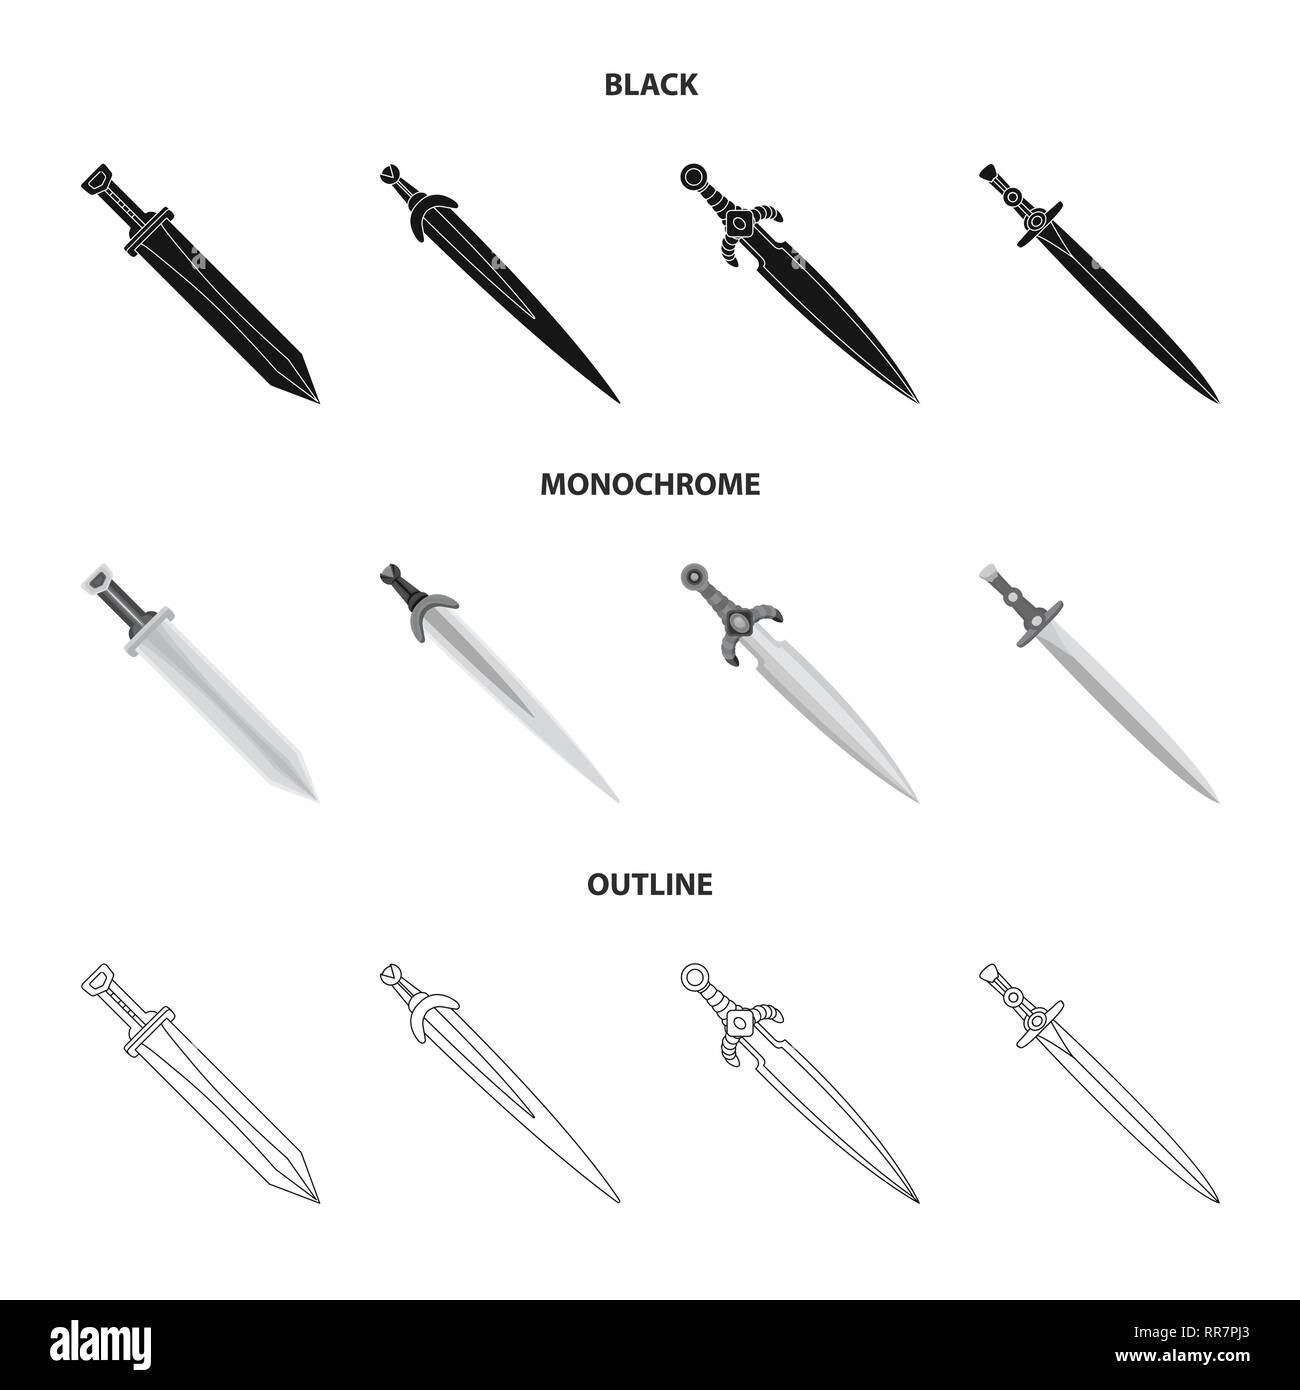 handle,power,Spanish,longsword,viking,hilt,steel,conqueror,decoration,silver,star,ornament,gold,knight,murder,copper,soldier,stone,warrior,ruby,military,fantasy,game,armor,sharp,blade,sword,dagger,knife,weapon,saber,medieval,set,vector,icon,illustration,isolated,collection,design,element,graphic,sign Vector Vectors , Stock Vector